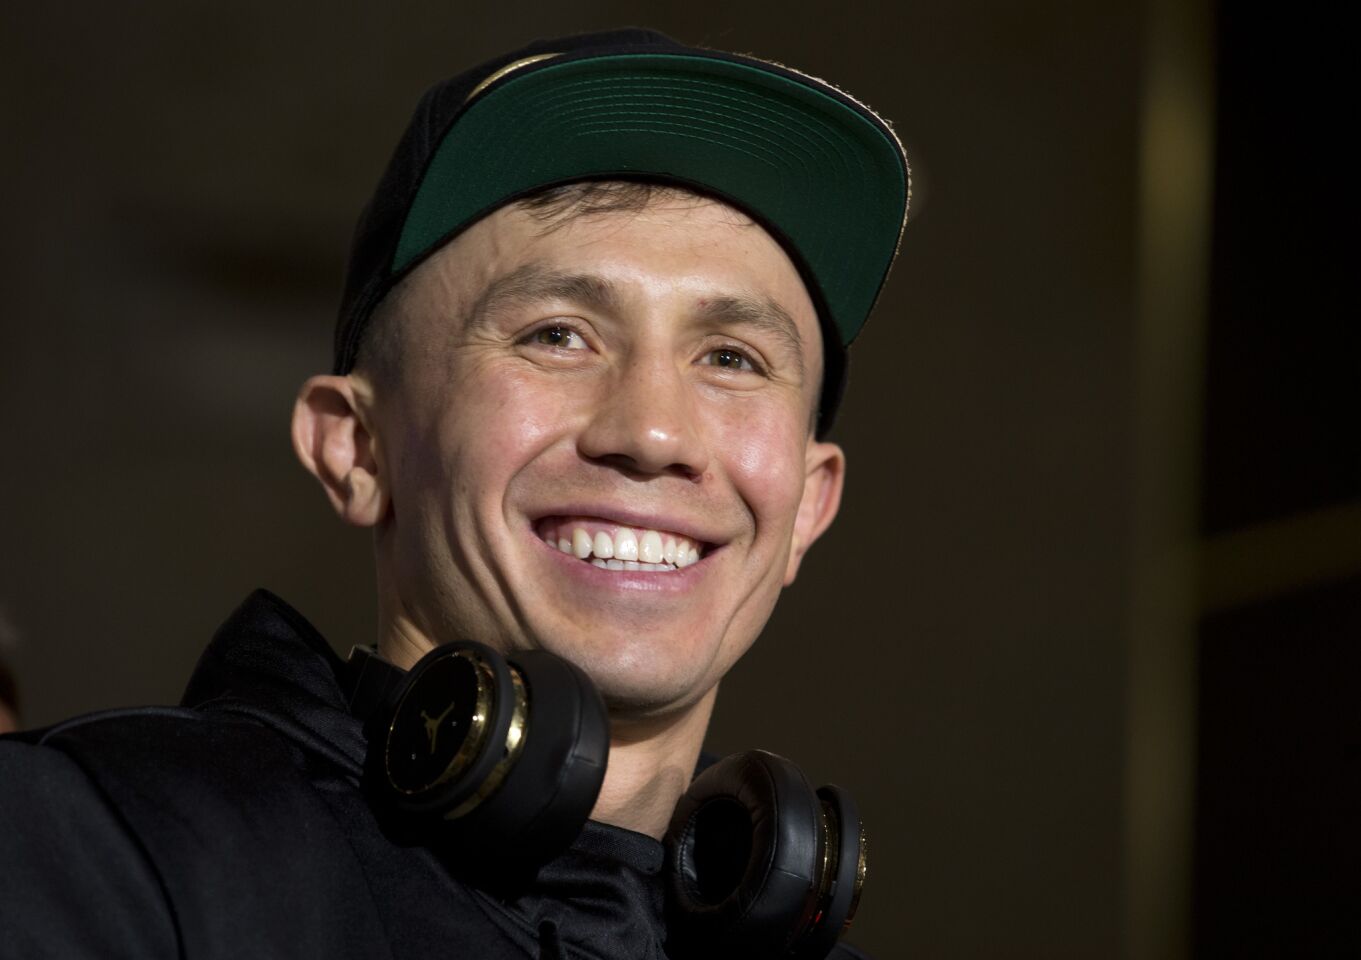 WBC/WBA middleweight boxing champion Gennady Golovkin of Kazakhstan smiles after arriving at the MGM Grand hotel-casino in Las Vegas Tuesday, Sept. 11, 2018. Golovkin will defend his titles against Canelo Alvarez of Mexico in a rematch at T-Mobile Arena in Las Vegas on Sept. 15. (Steve Marcus/Las Vegas Sun via AP)